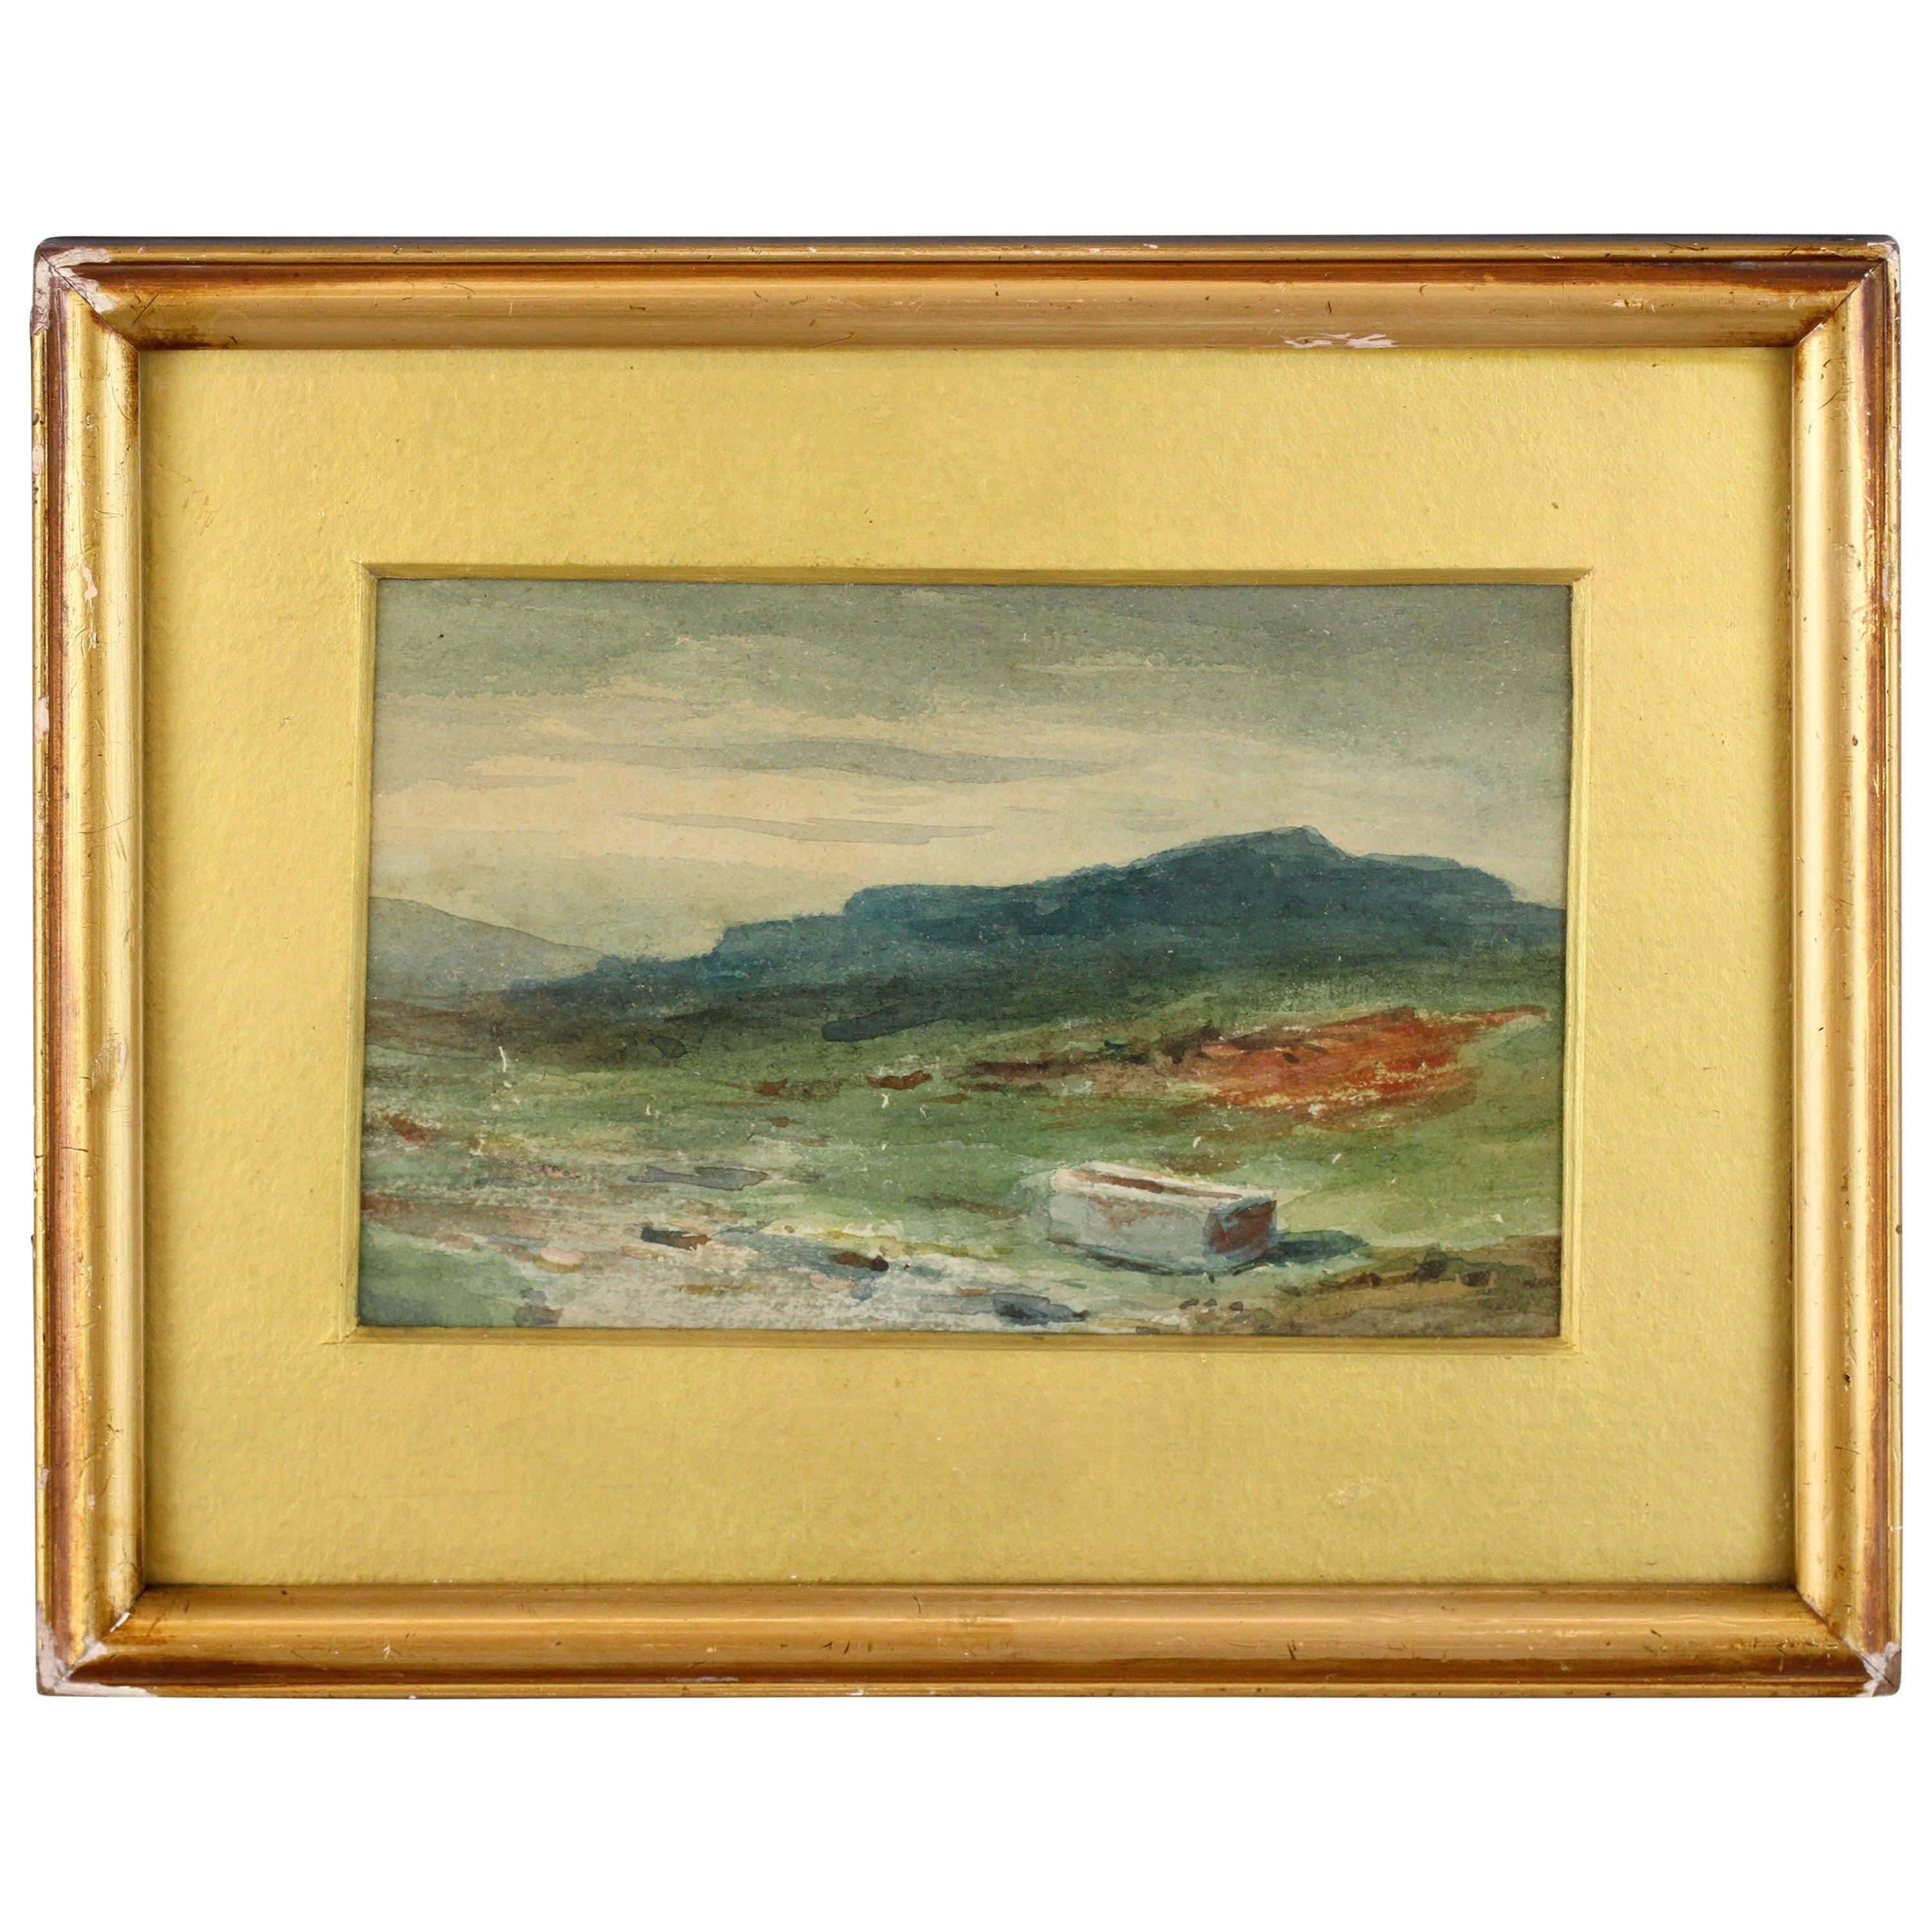 Unknown Artist Watercolor Painting, Depicting Mountain's Scenery, 1940s